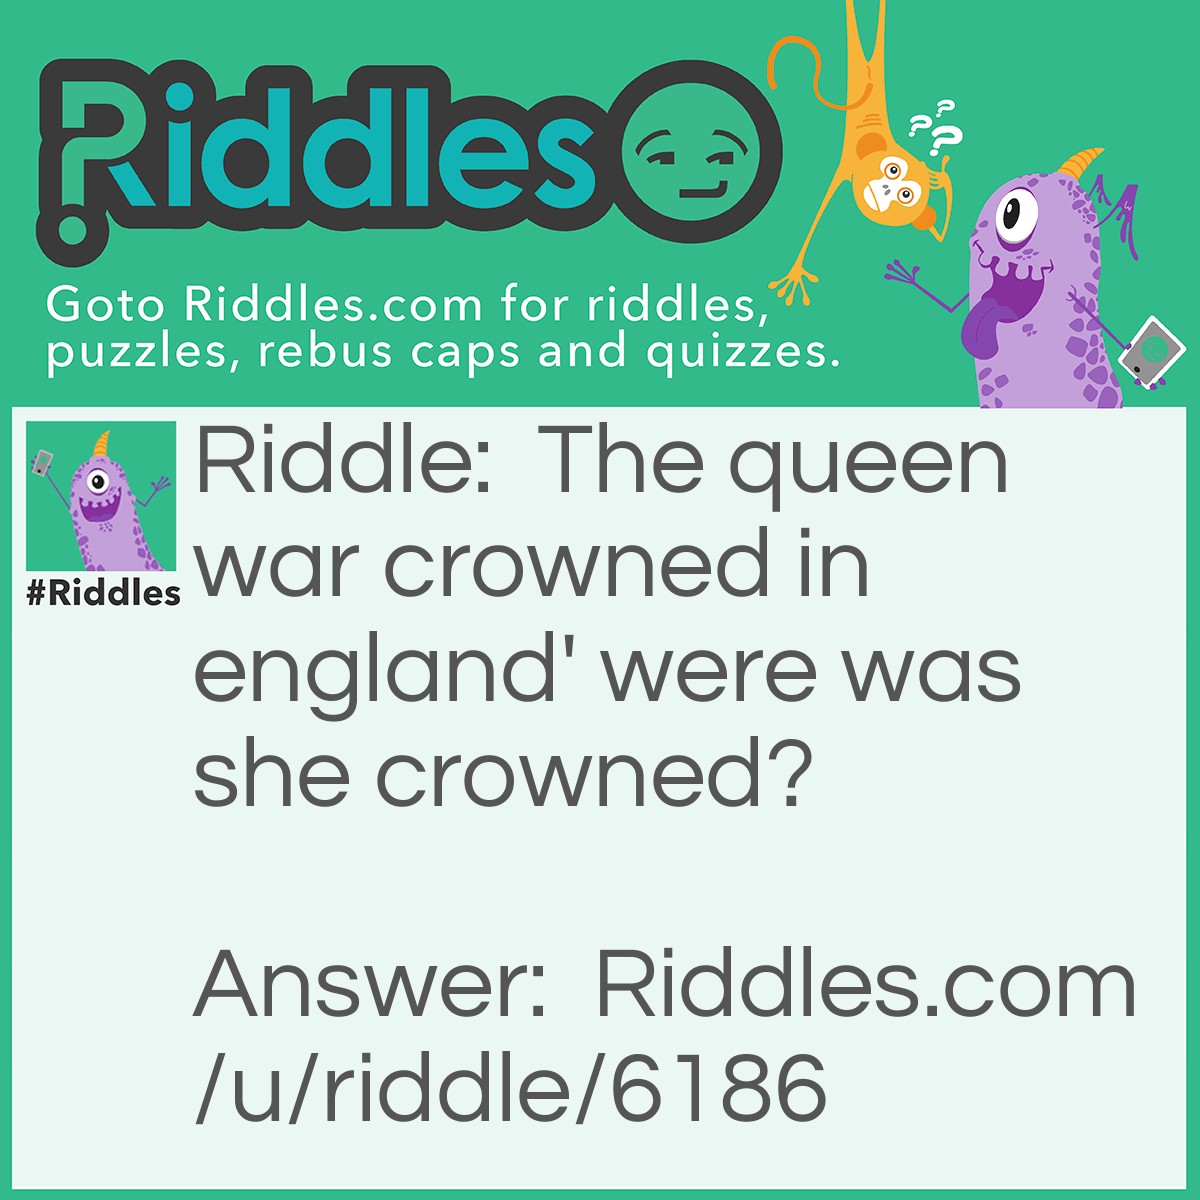 Riddle: The queen war crowned in england' were was she crowned? Answer: On her head.